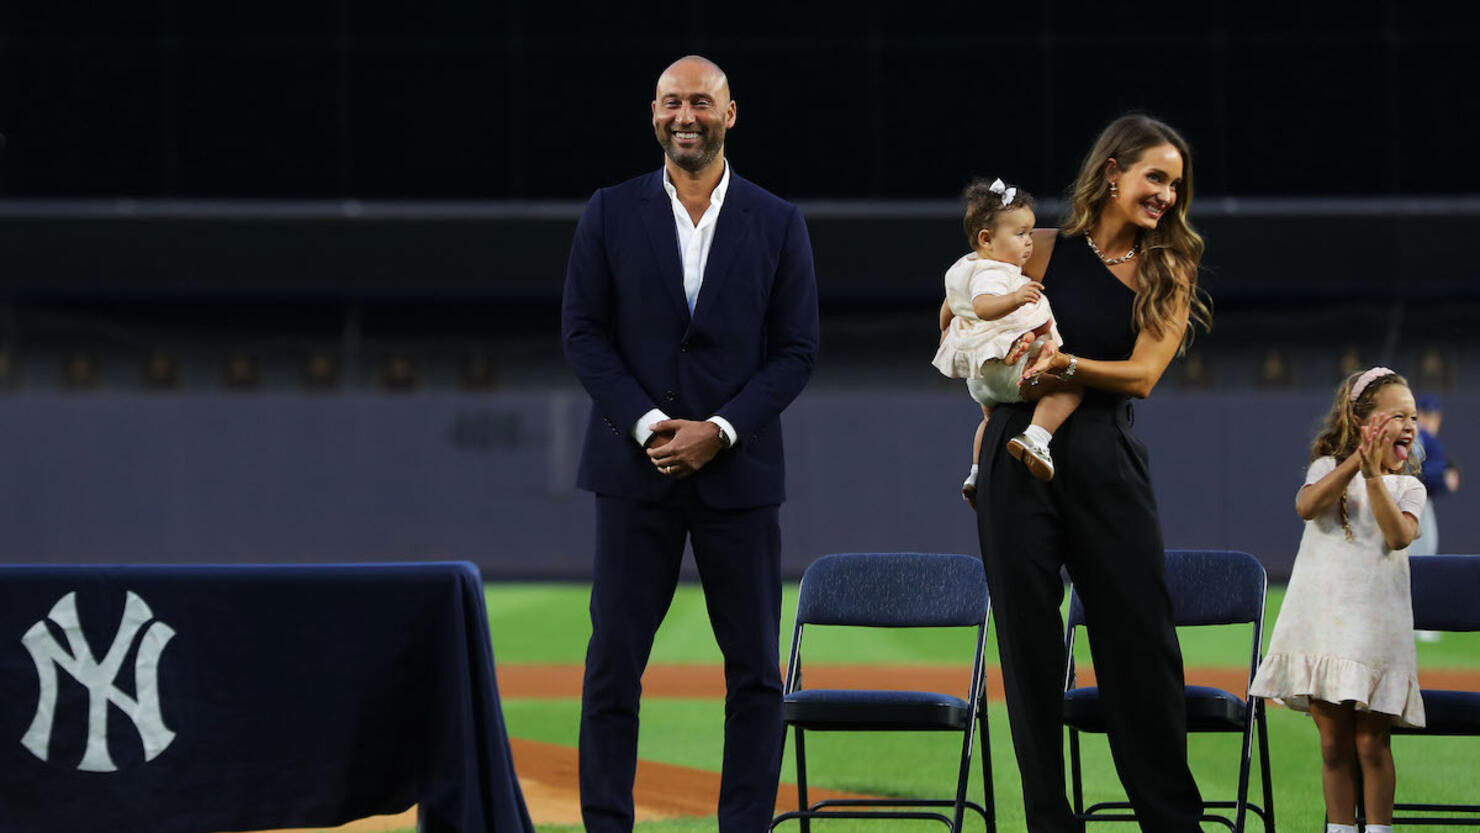 Surprise! Derek Jeter and Wife Hannah Welcome Baby No. 3